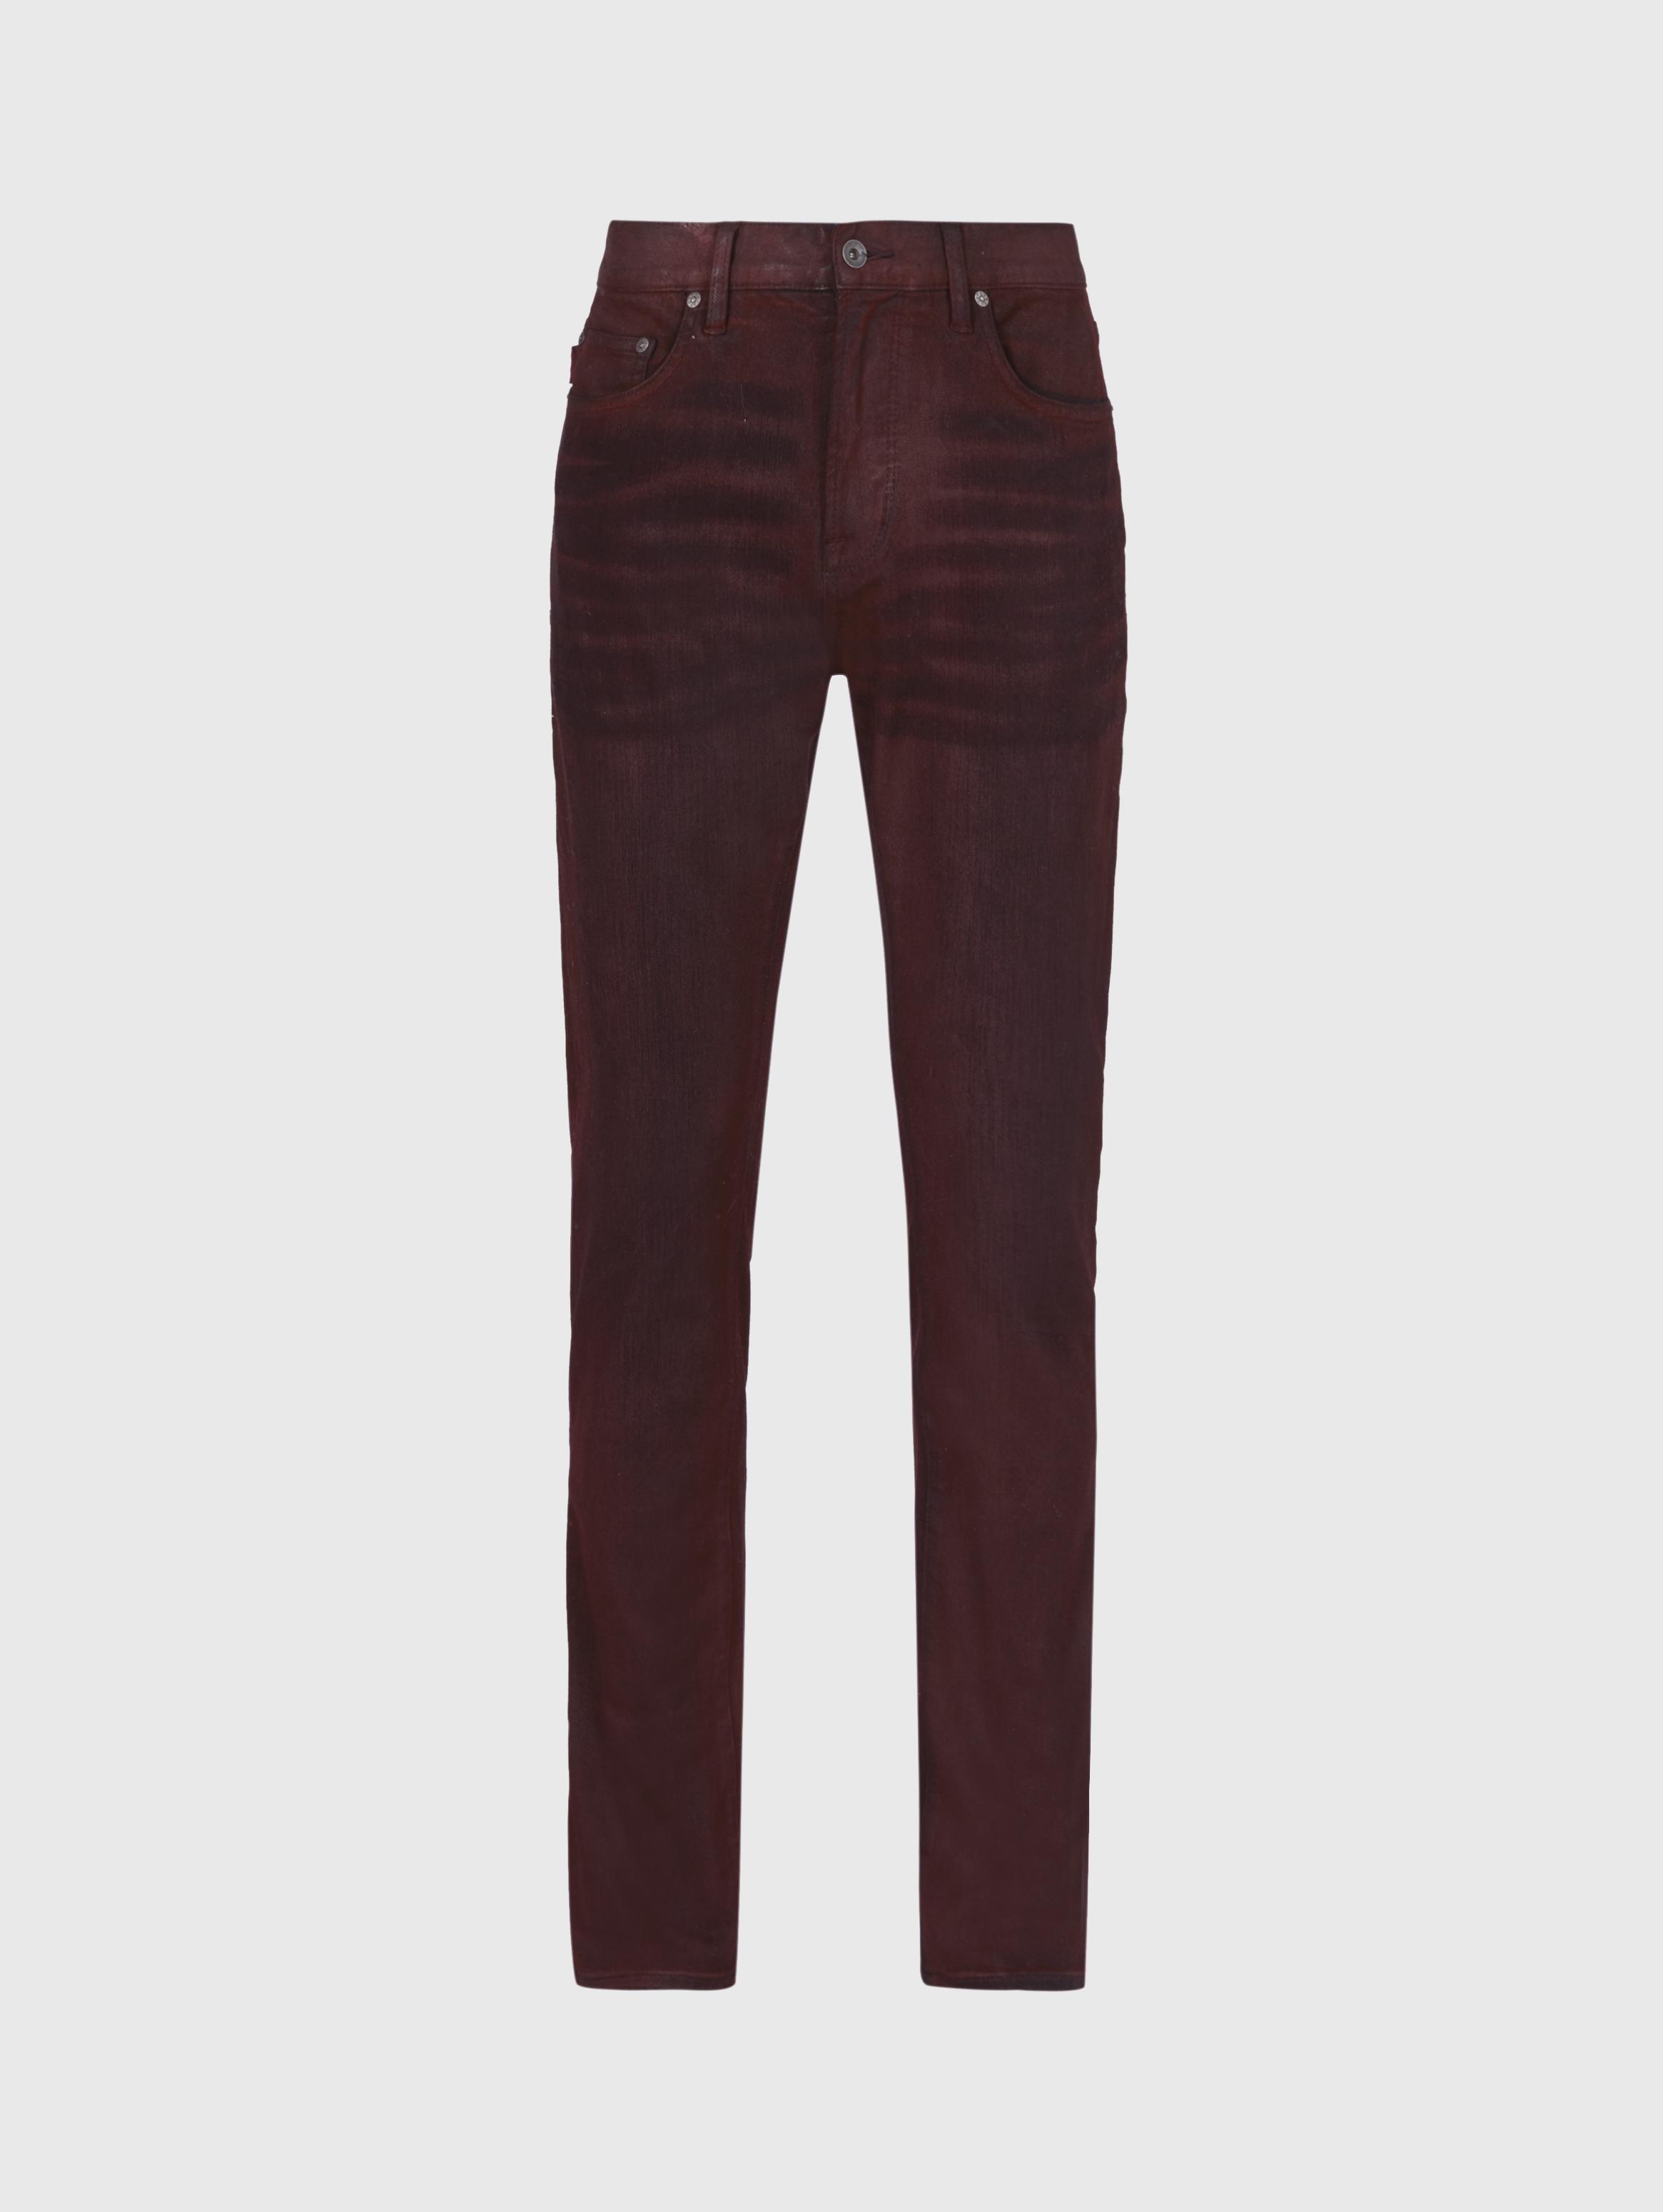 WIGHT SKINNY STRAIGHT FIT JEAN - GREGORY WASH image number 3